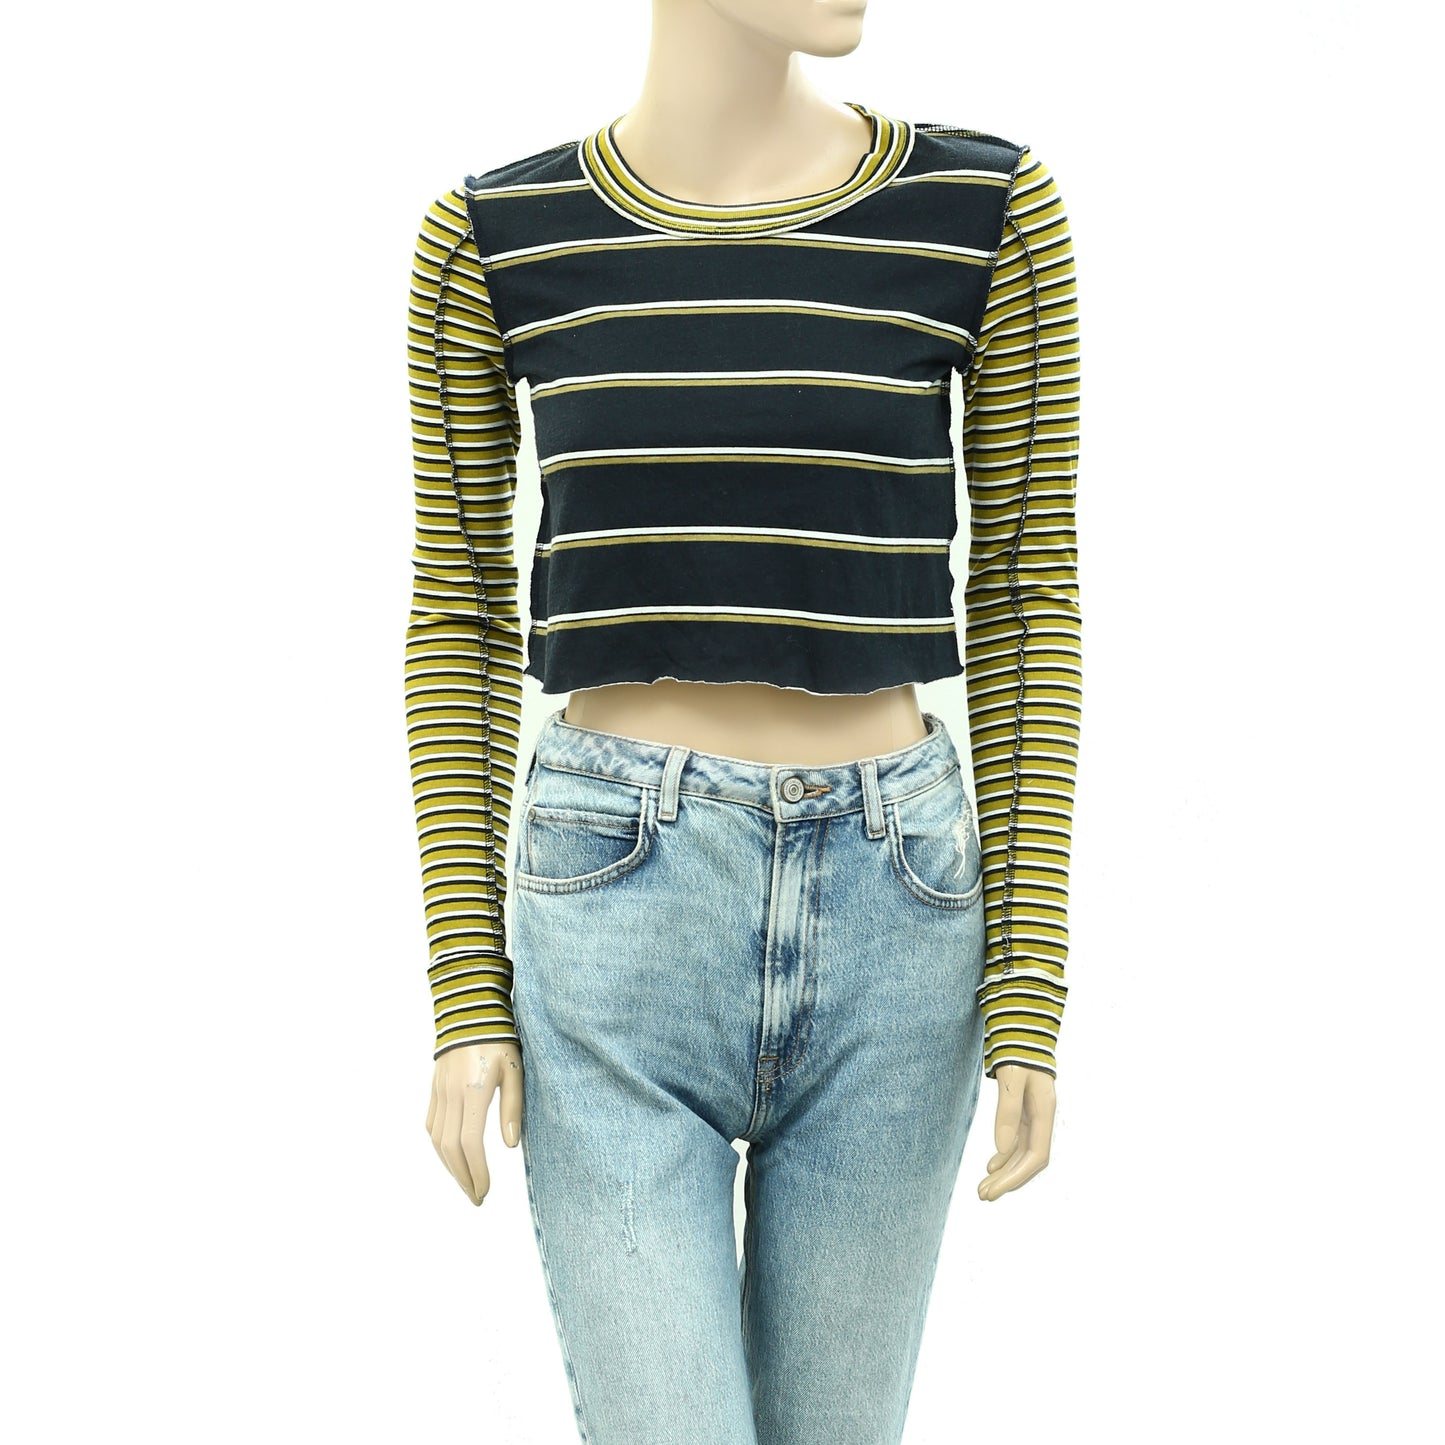 BDG Urban Outfitters Seb Spliced Stripe Tee Cropped Top